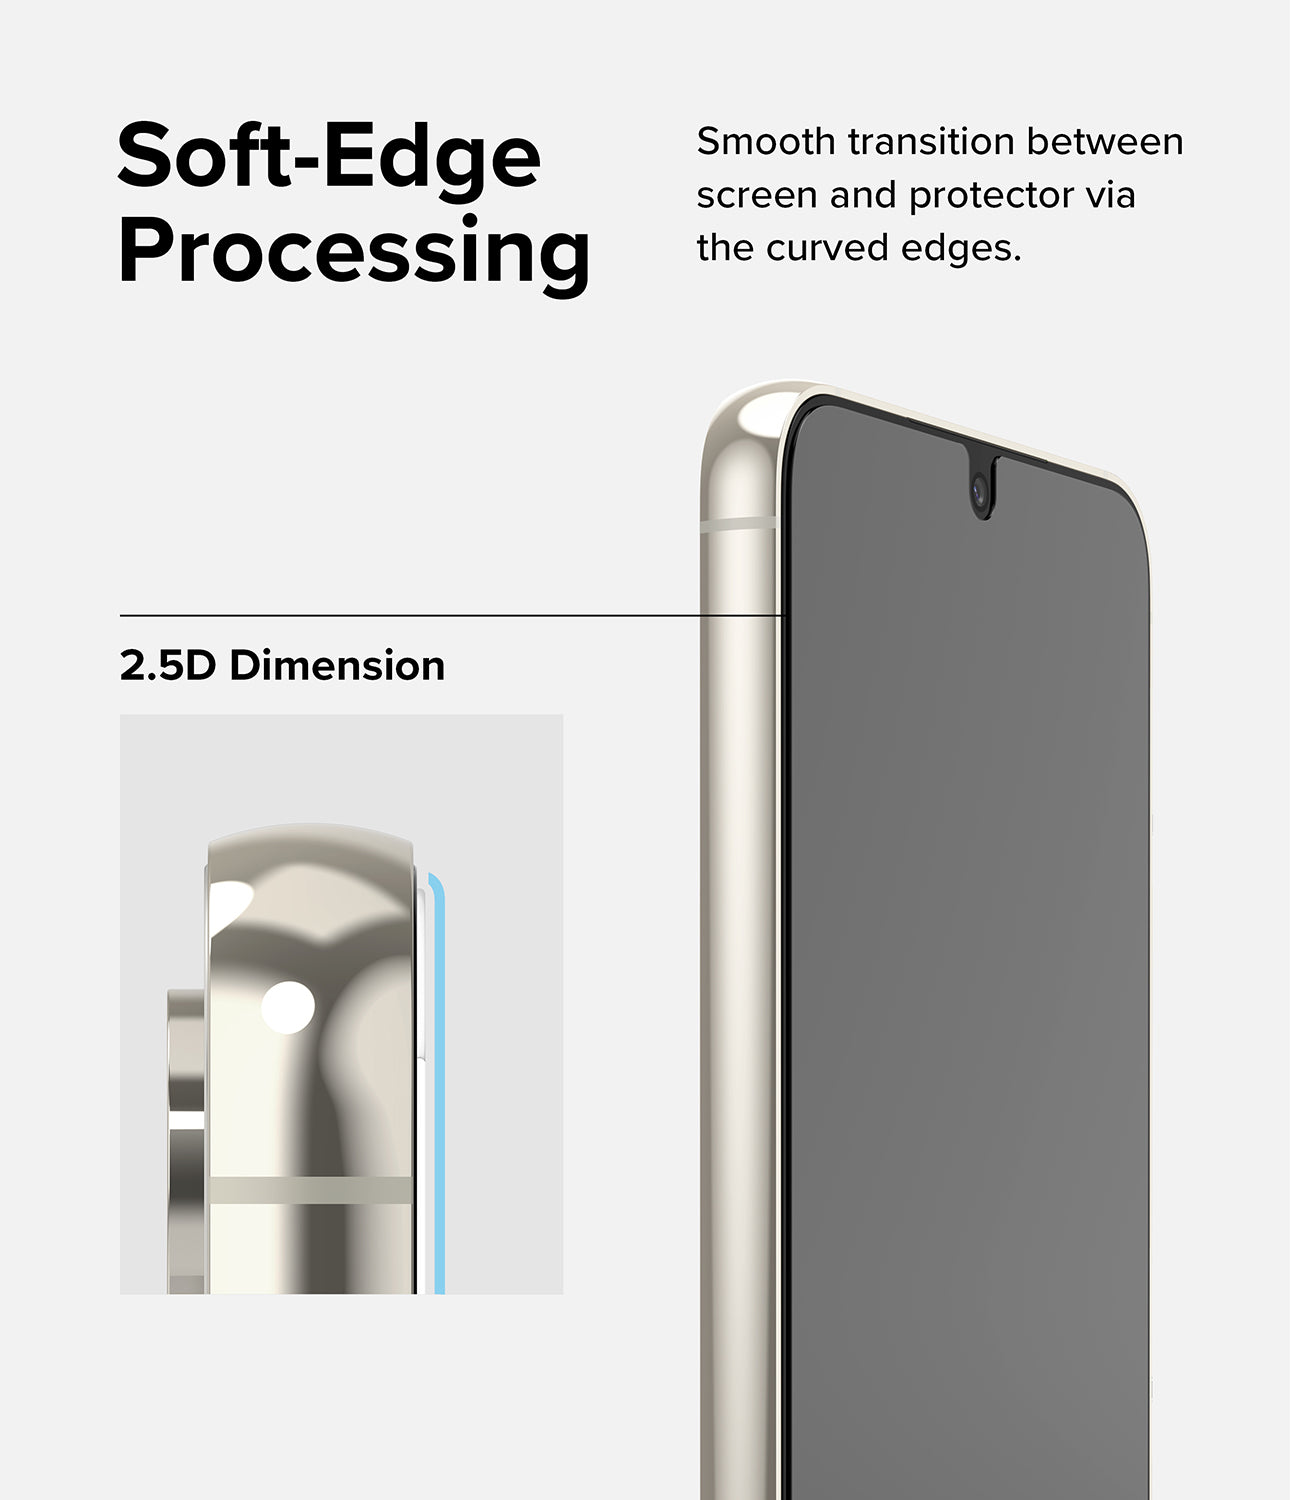 Soft-Edge Processing l Smooth transition between screen and protector via the curved edges.